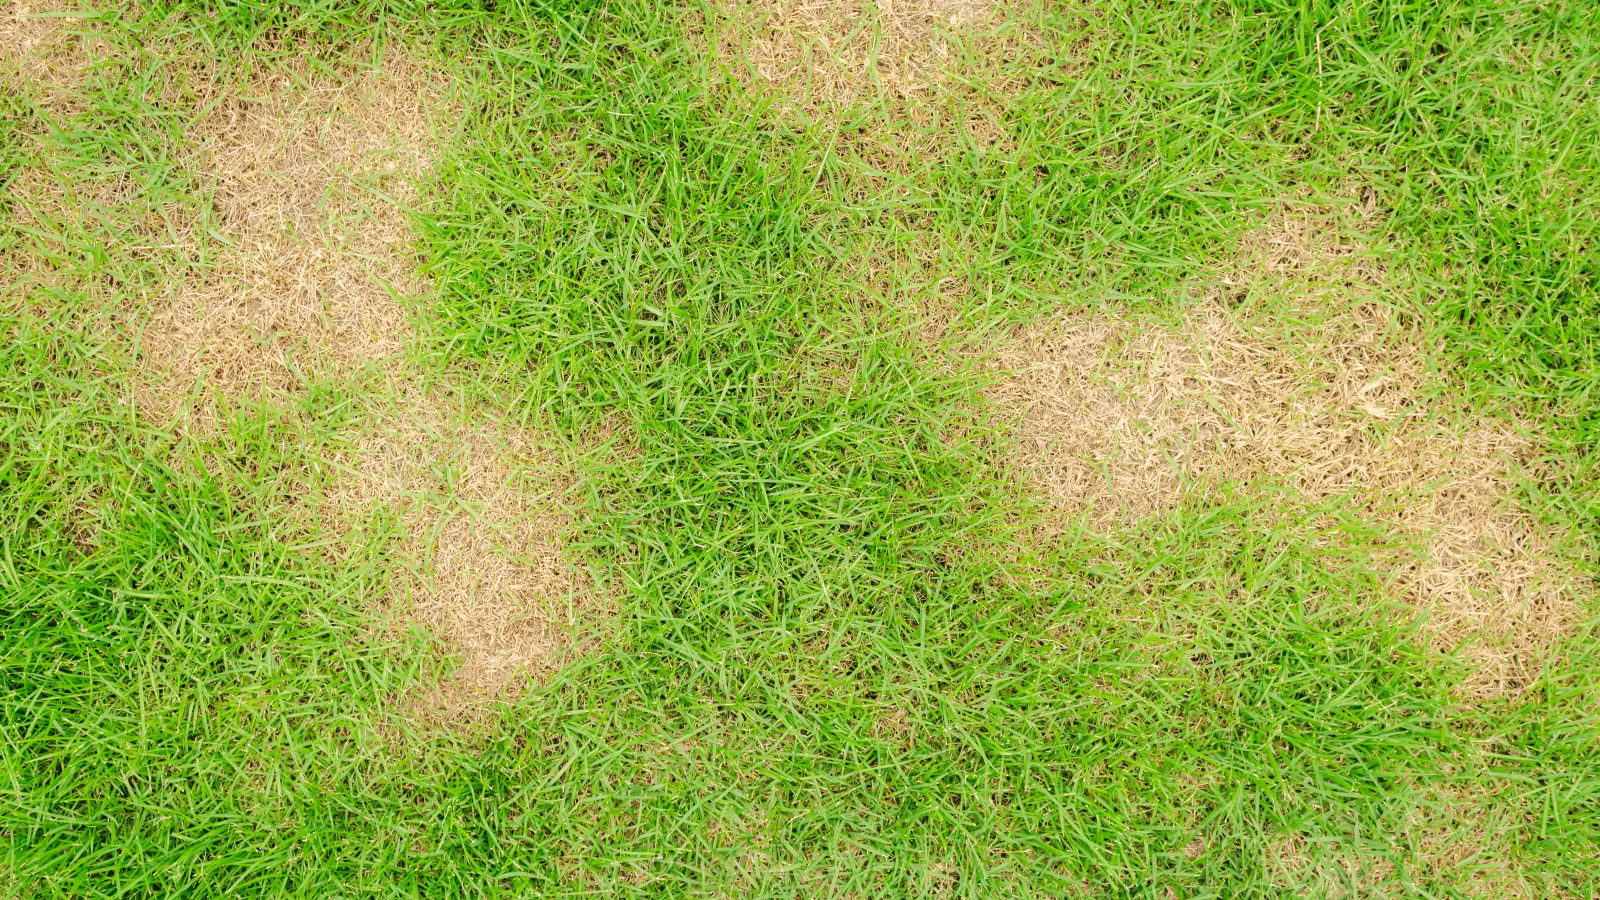 Rhizoctonia Solani- Fungus That Causes Brown Patch